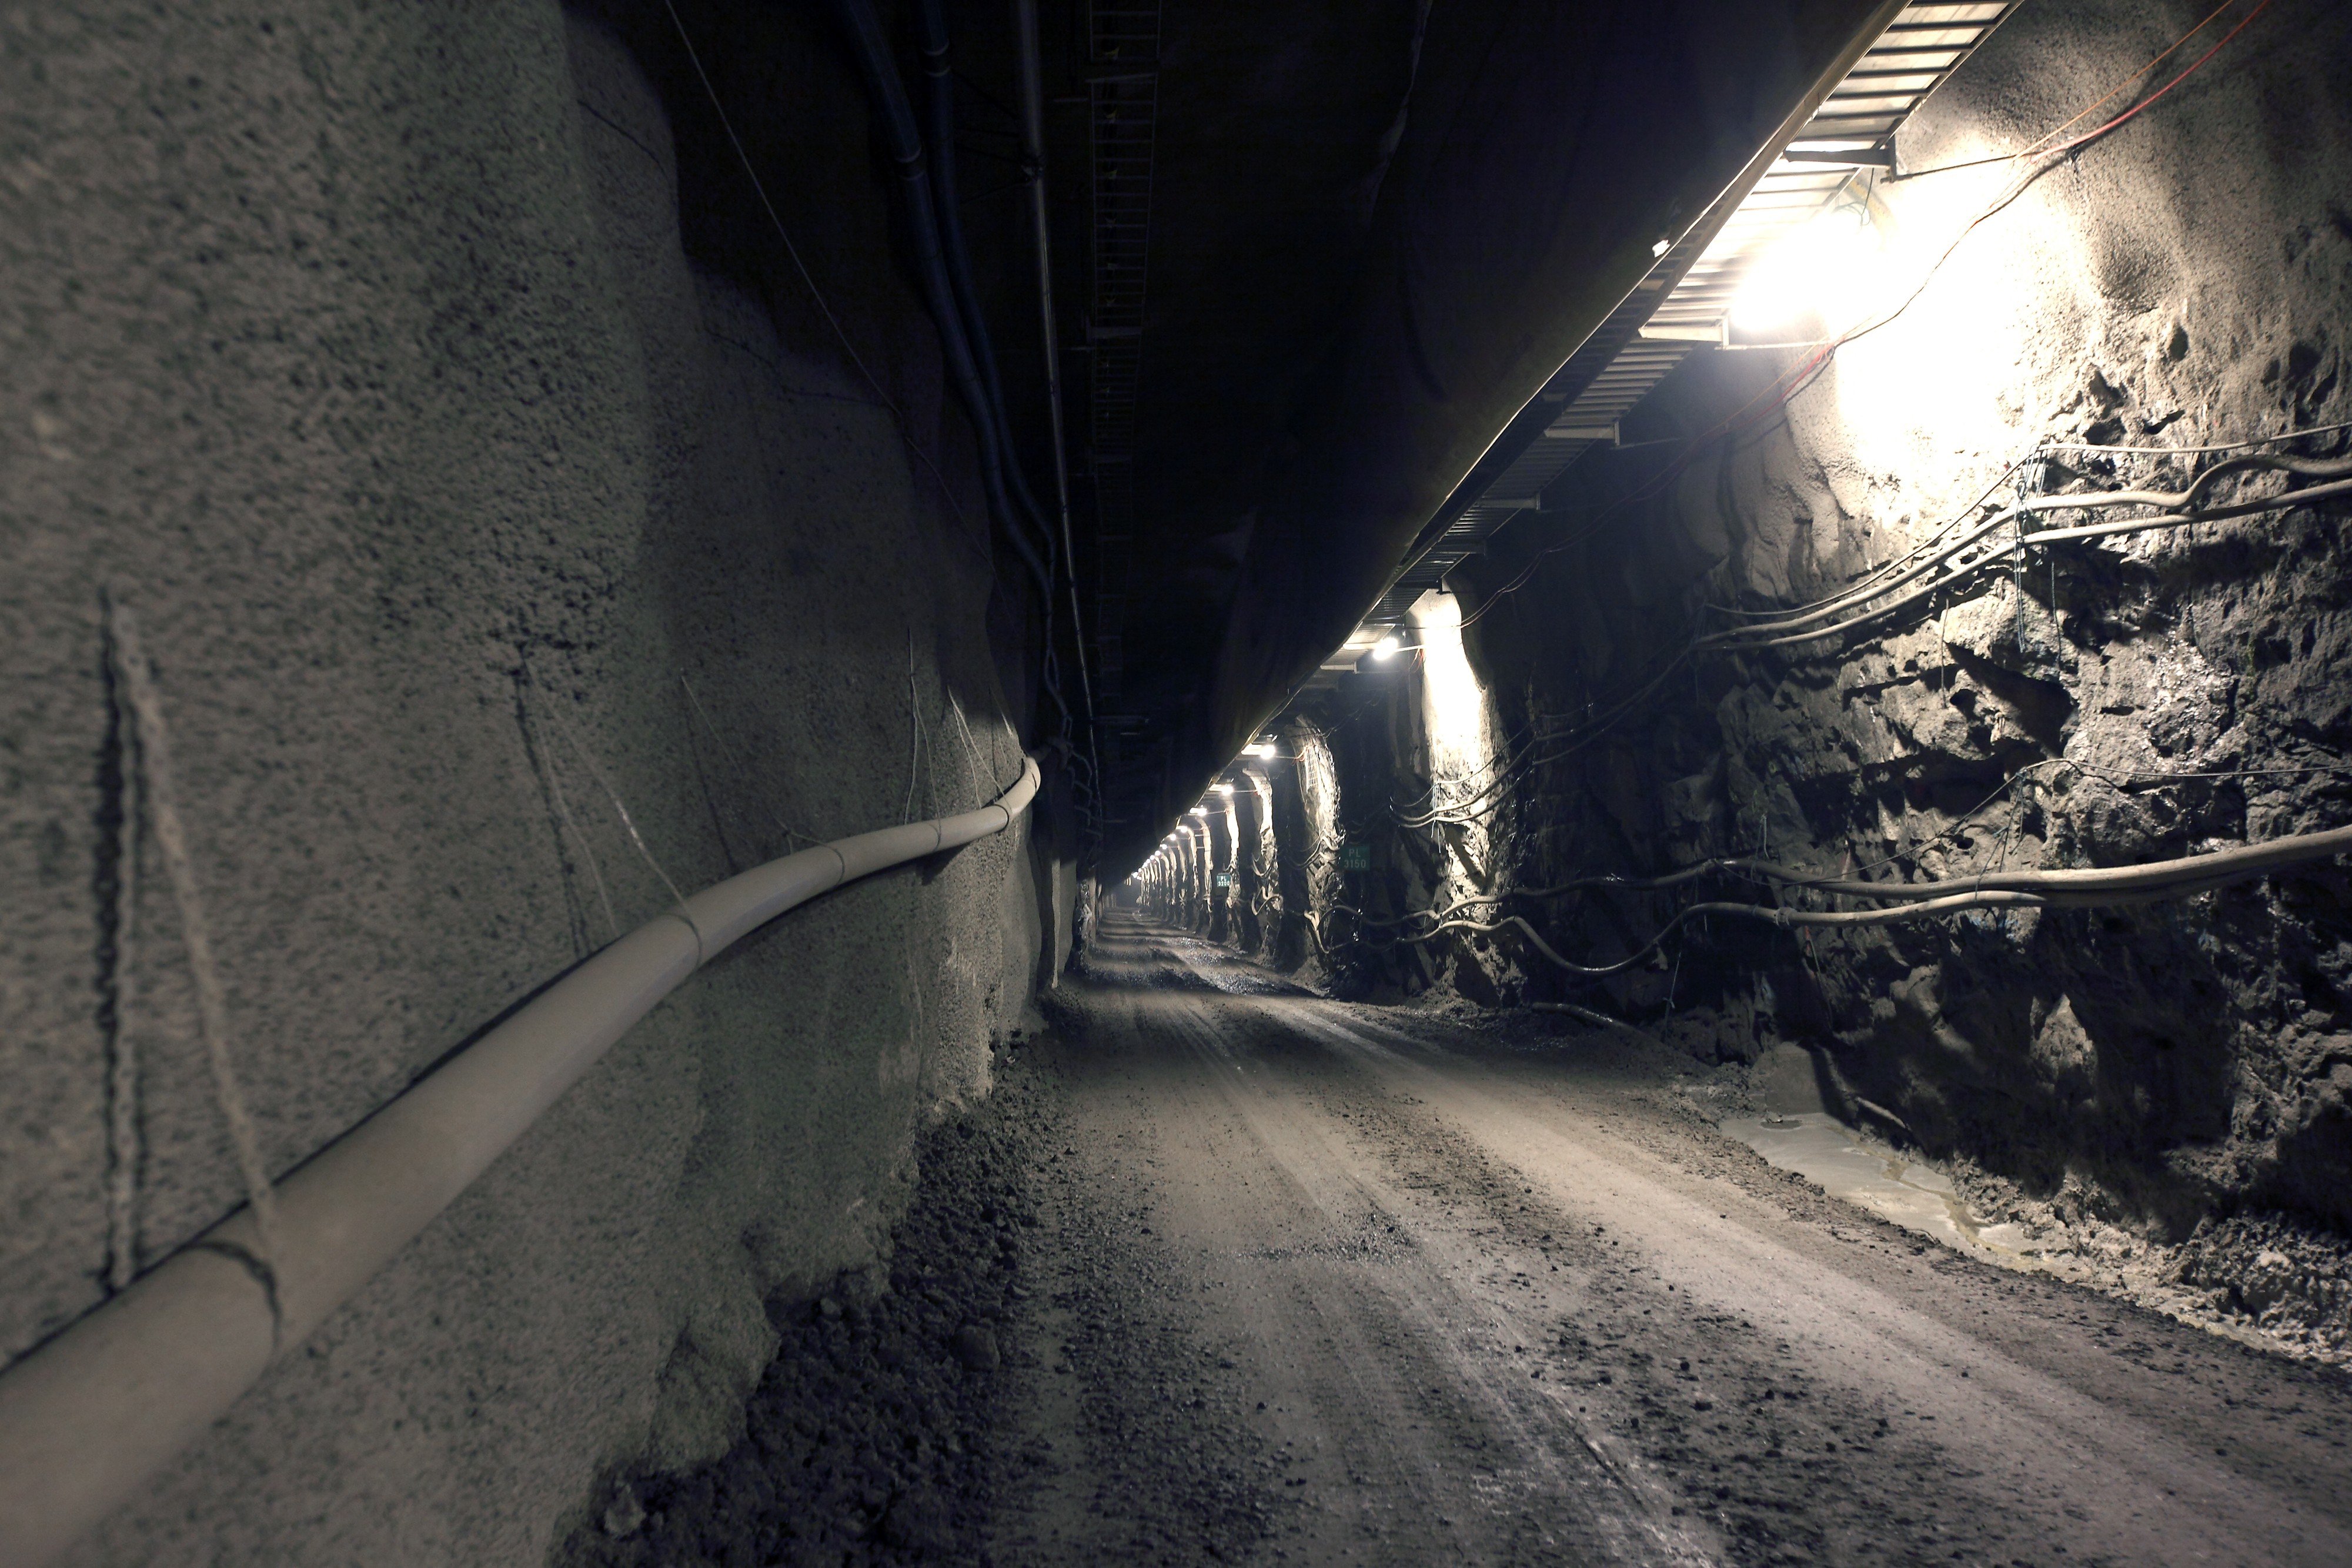 scandinavia, Finland, Nuclear, Architecture, Deposit, Material, Tunnel, Europe Wallpaper